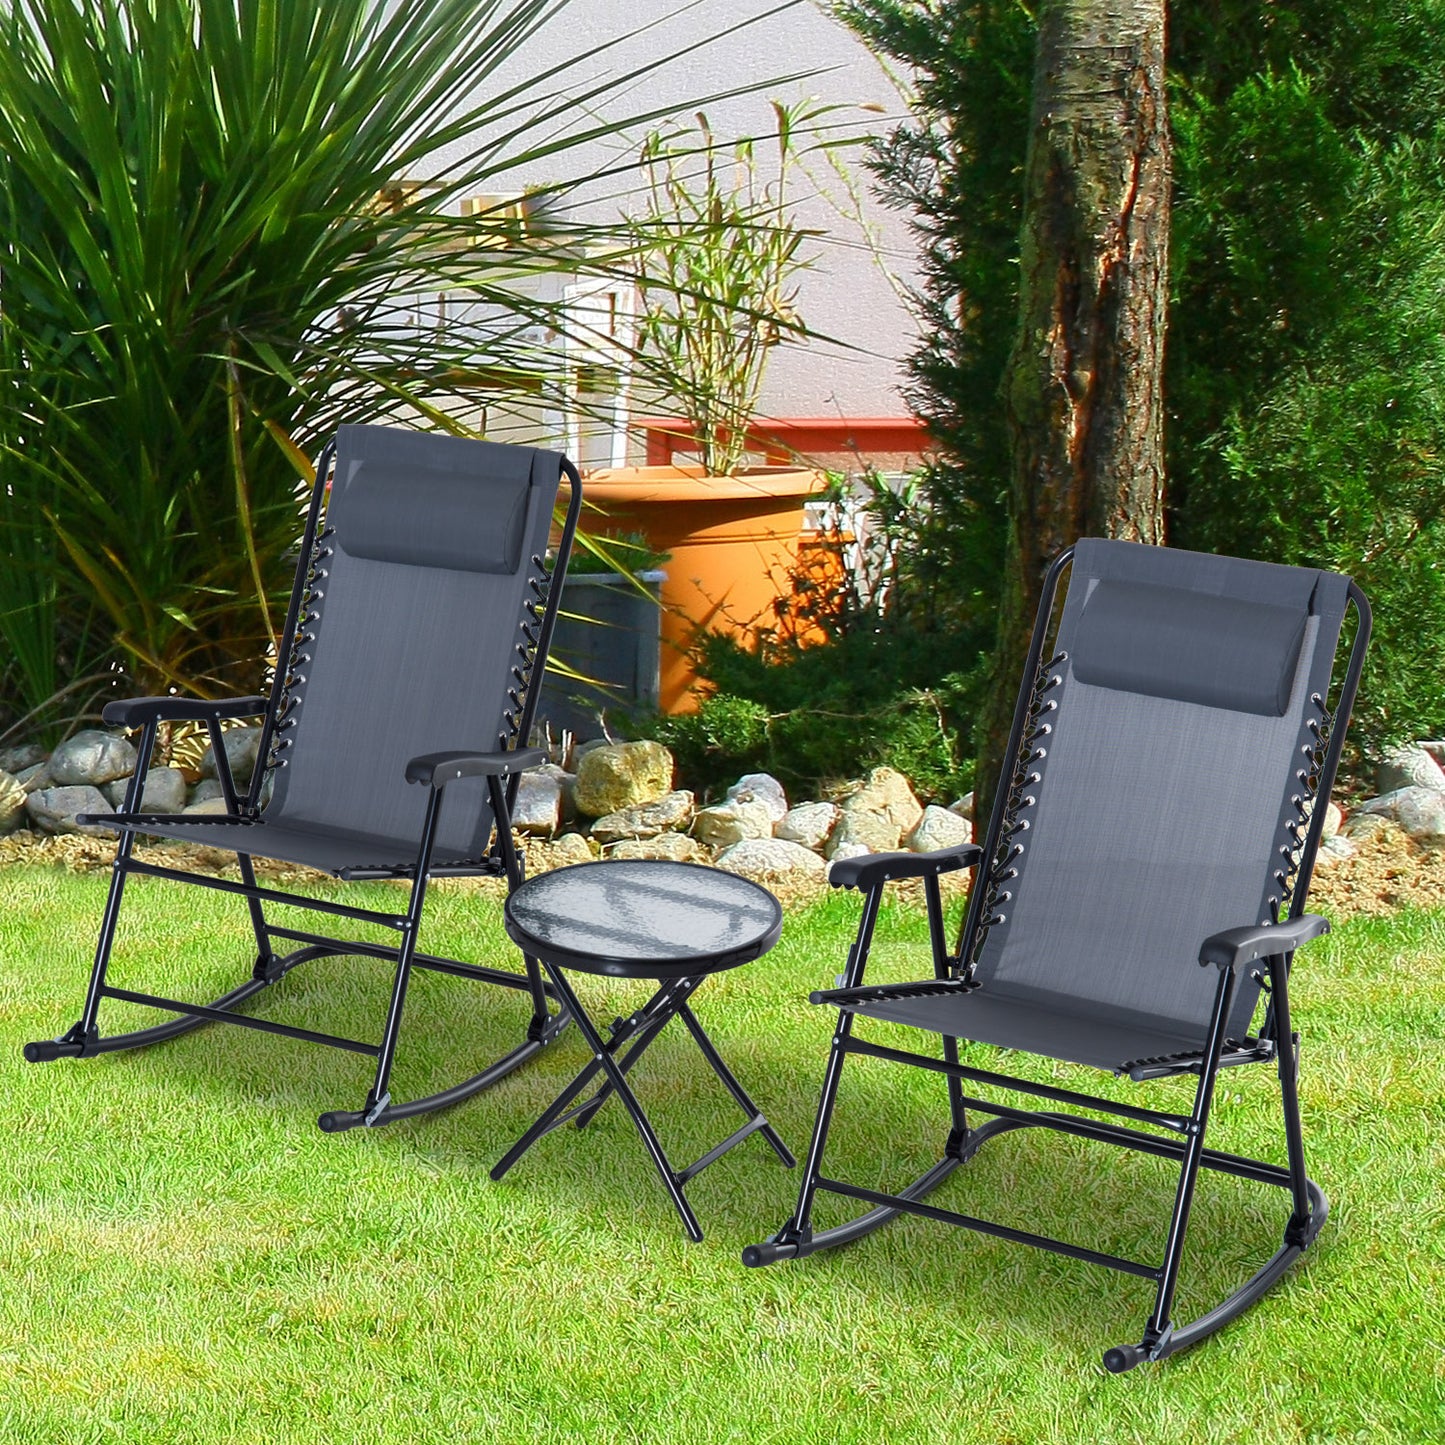 Outsunny 3 Piece Outdoor Rocking Bistro Set, Patio Furniture Set with 2 Folding Chairs and 1 Tempered Glass Table, Grey